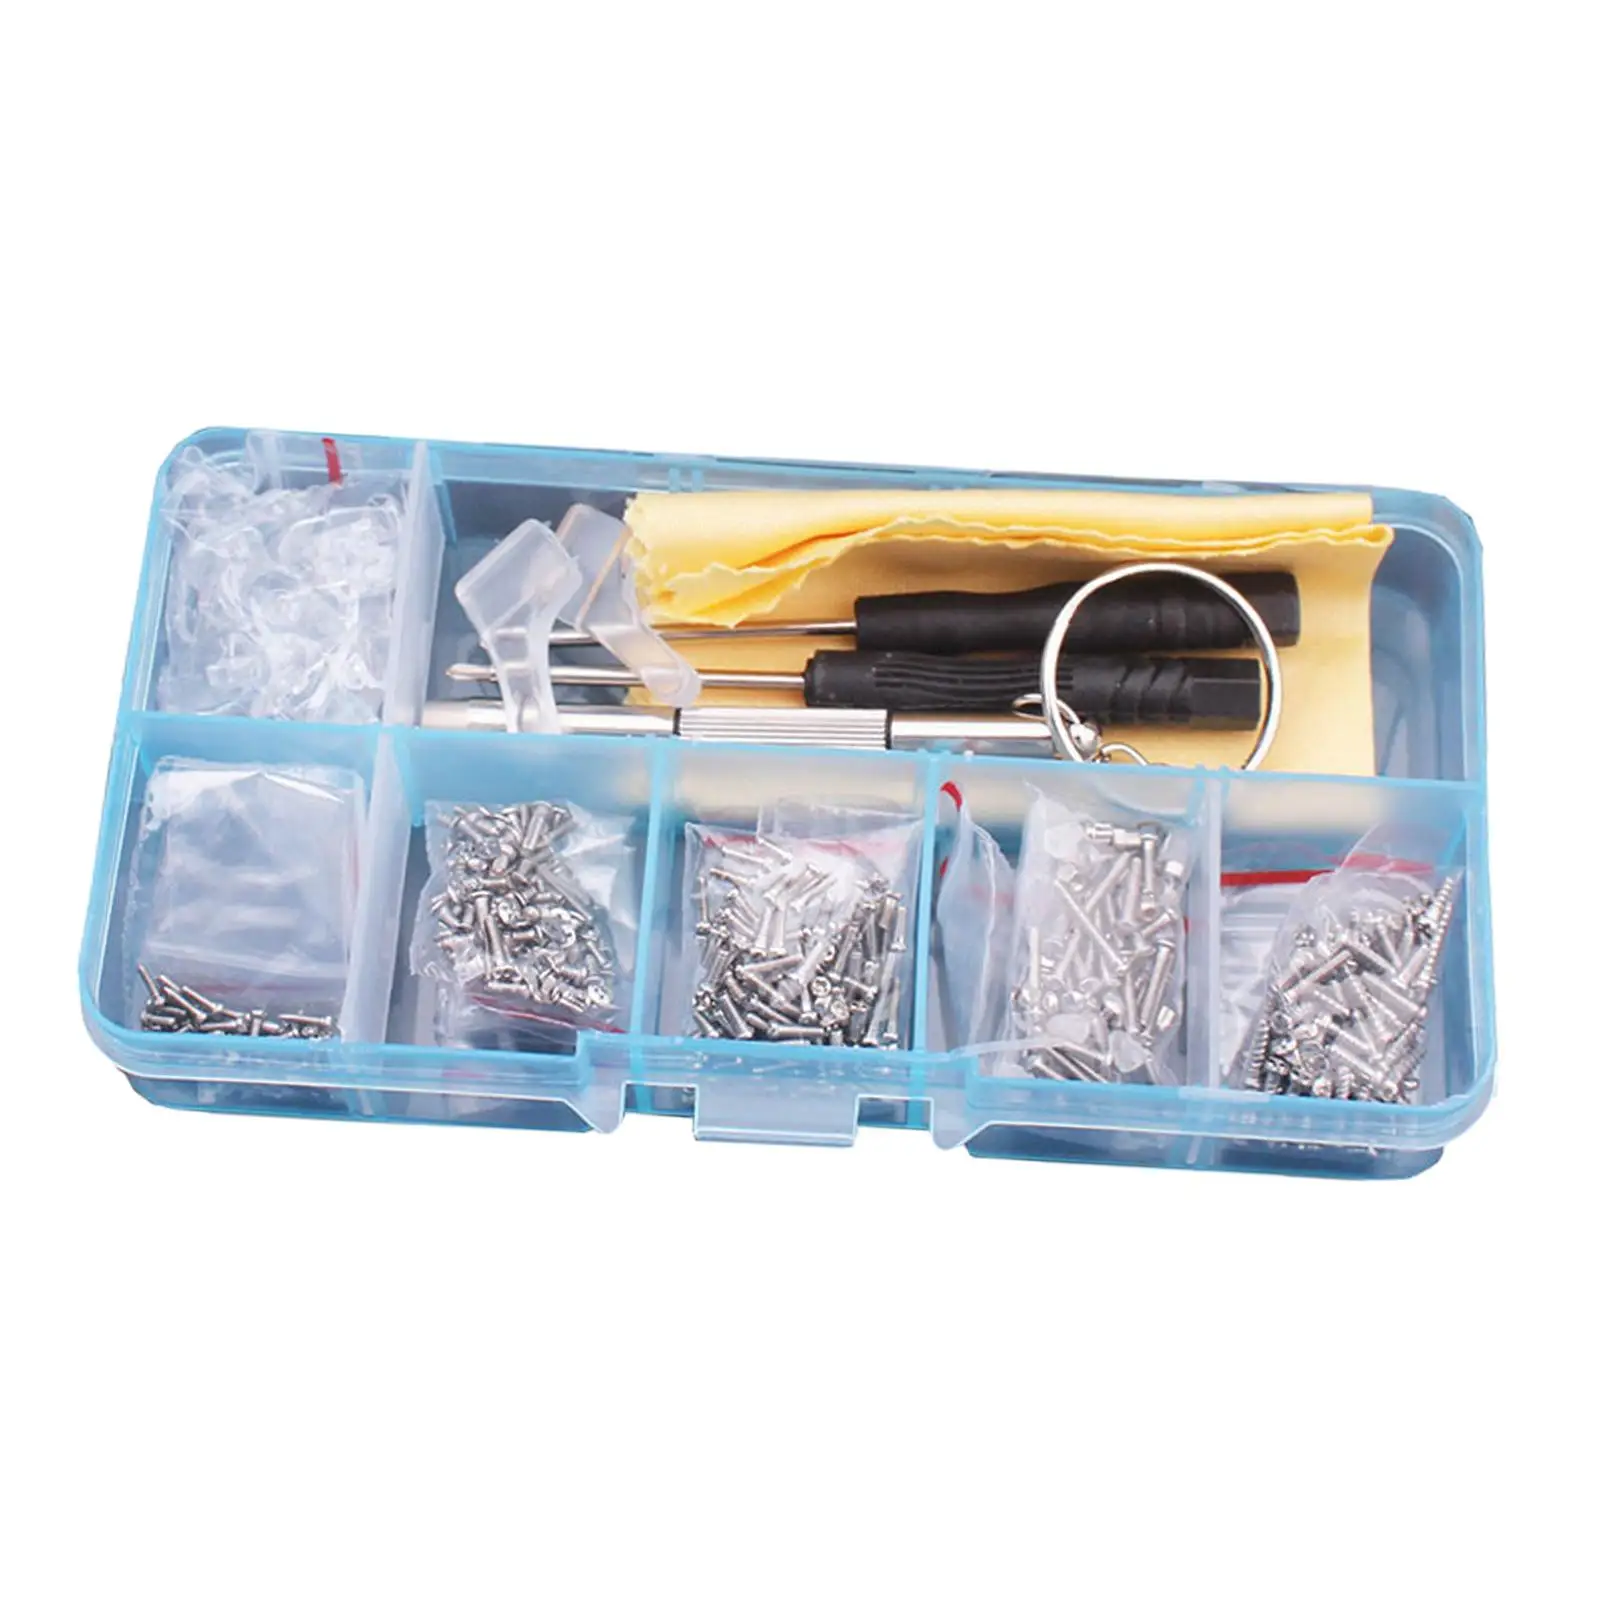 Eyeglass Repair Kits Include Nose Pads Portable Eye Glass Repairing Kits Multipurpose Replacement Accessories with Screw Box